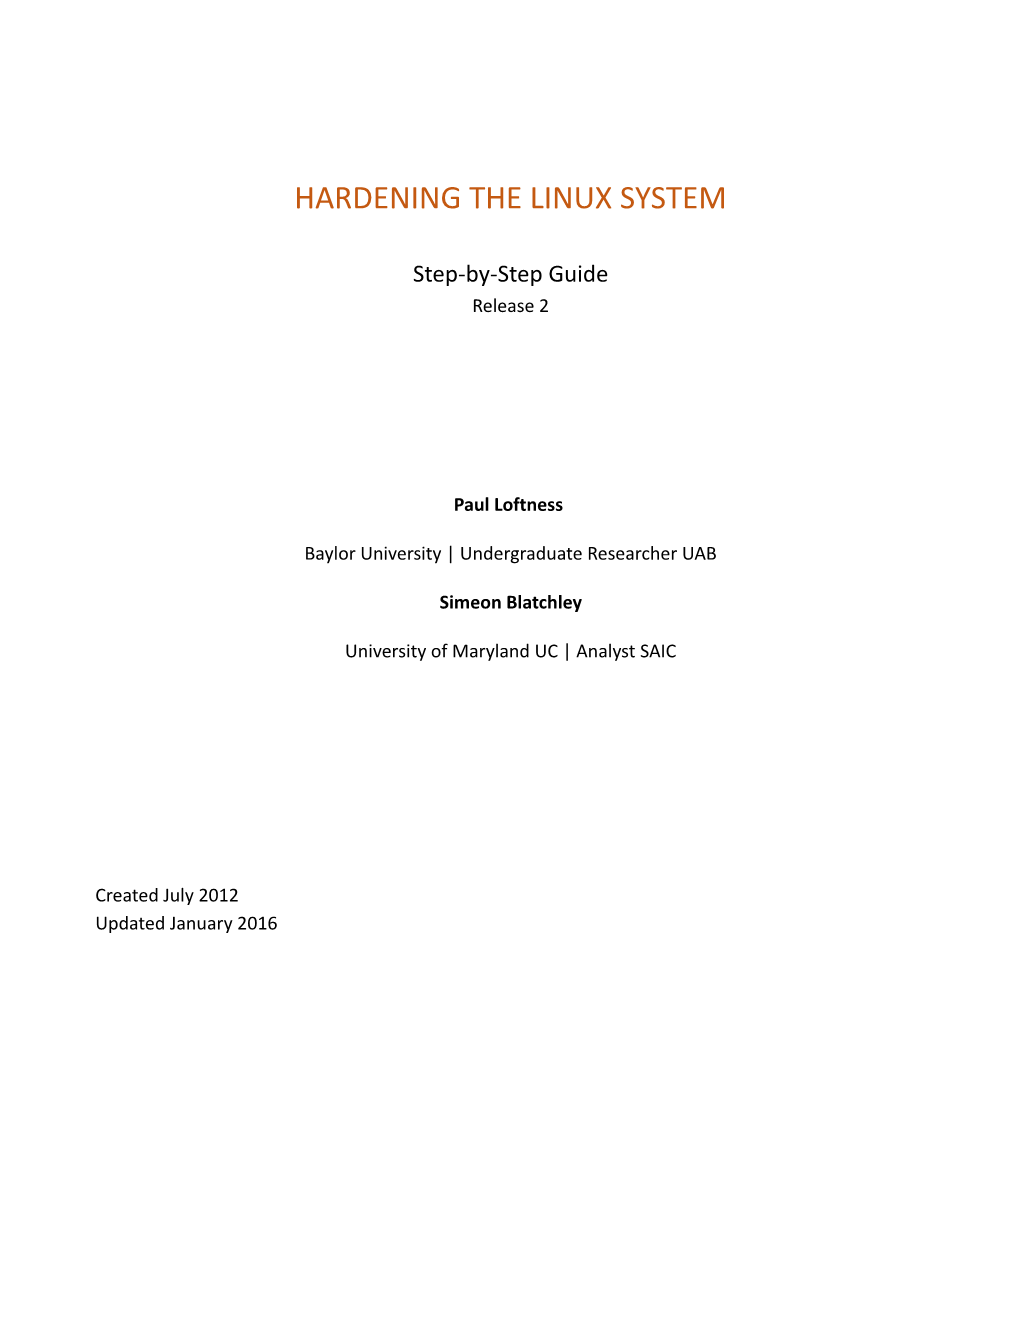 Hardening the Linux System